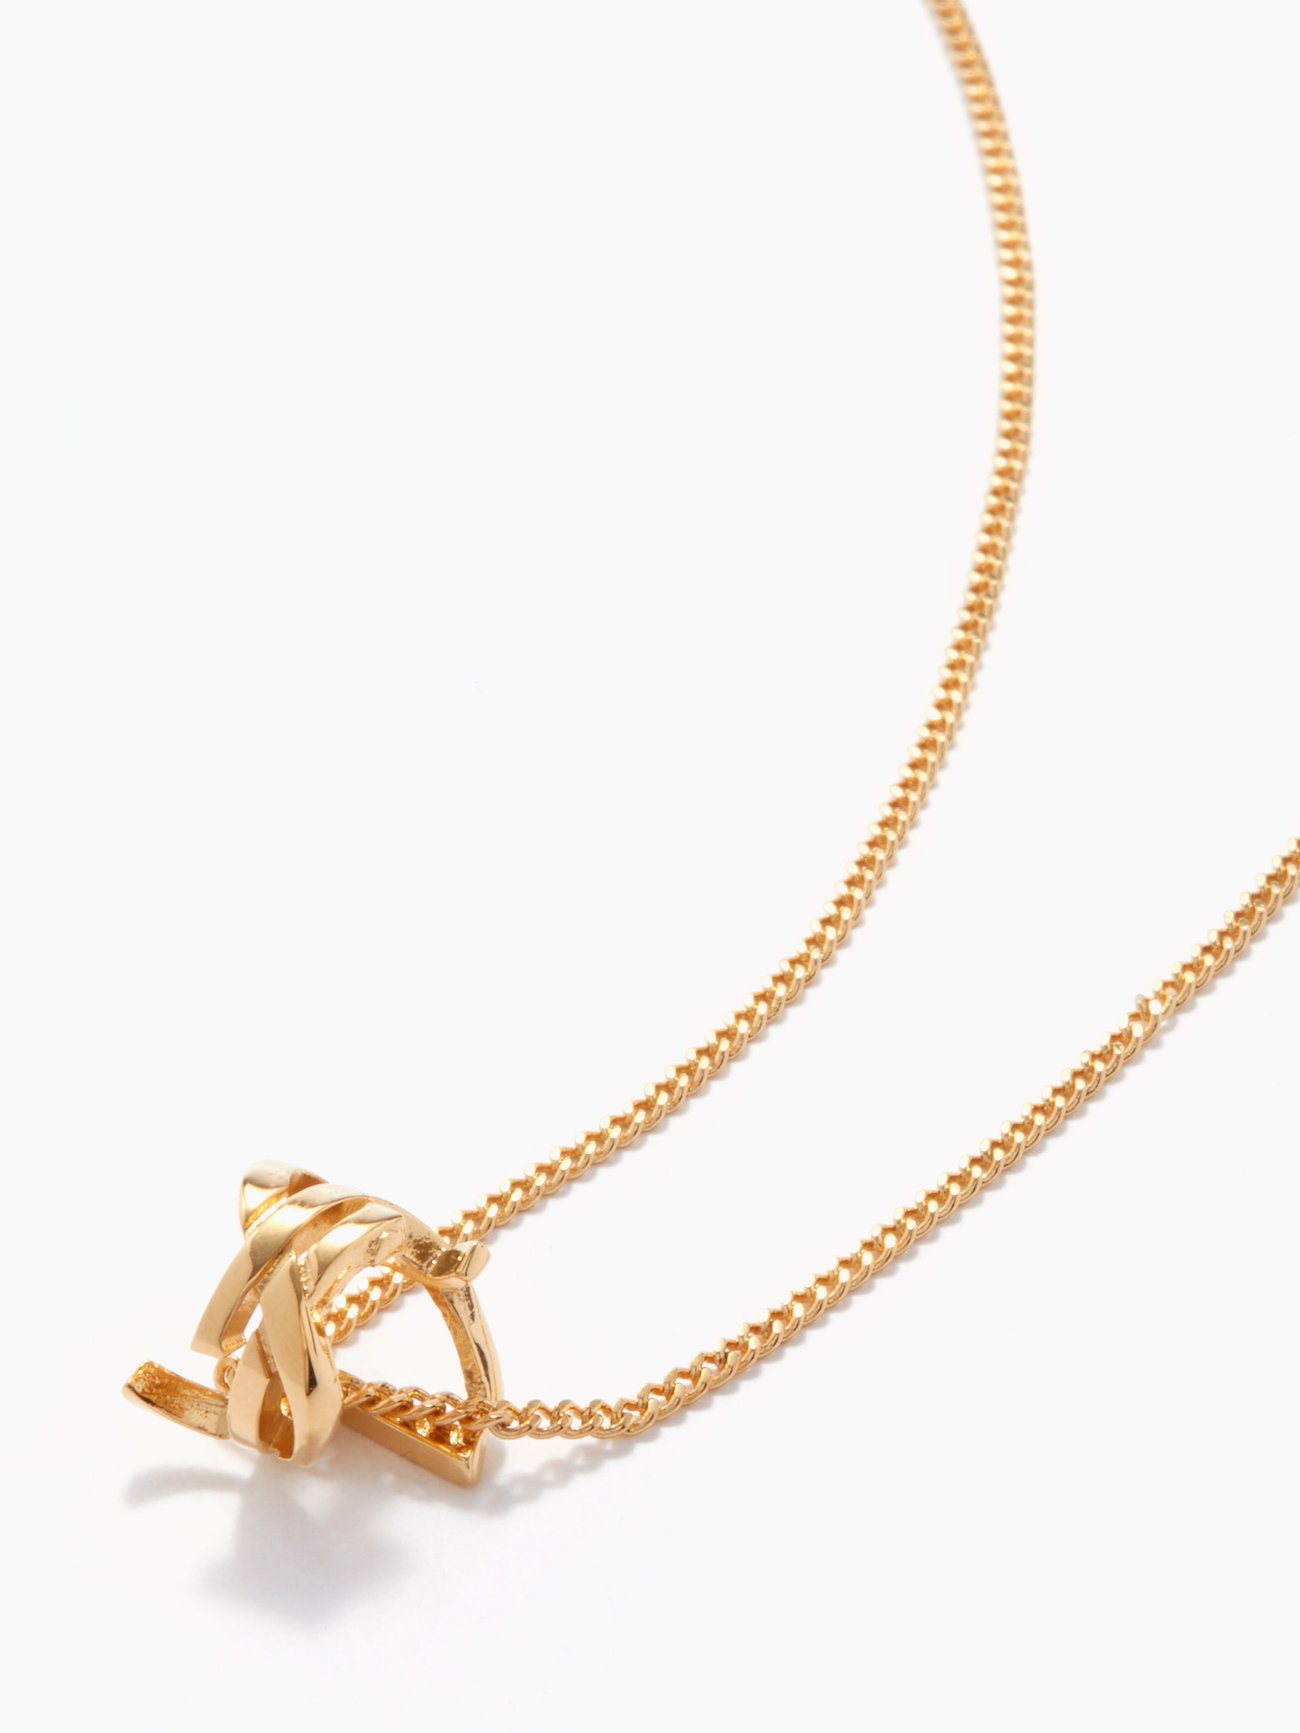 Yves Saint Laurent Necklace Gold GP Ysl Rhinestone Jewelry Stone Square Long Chain Ladies Plated